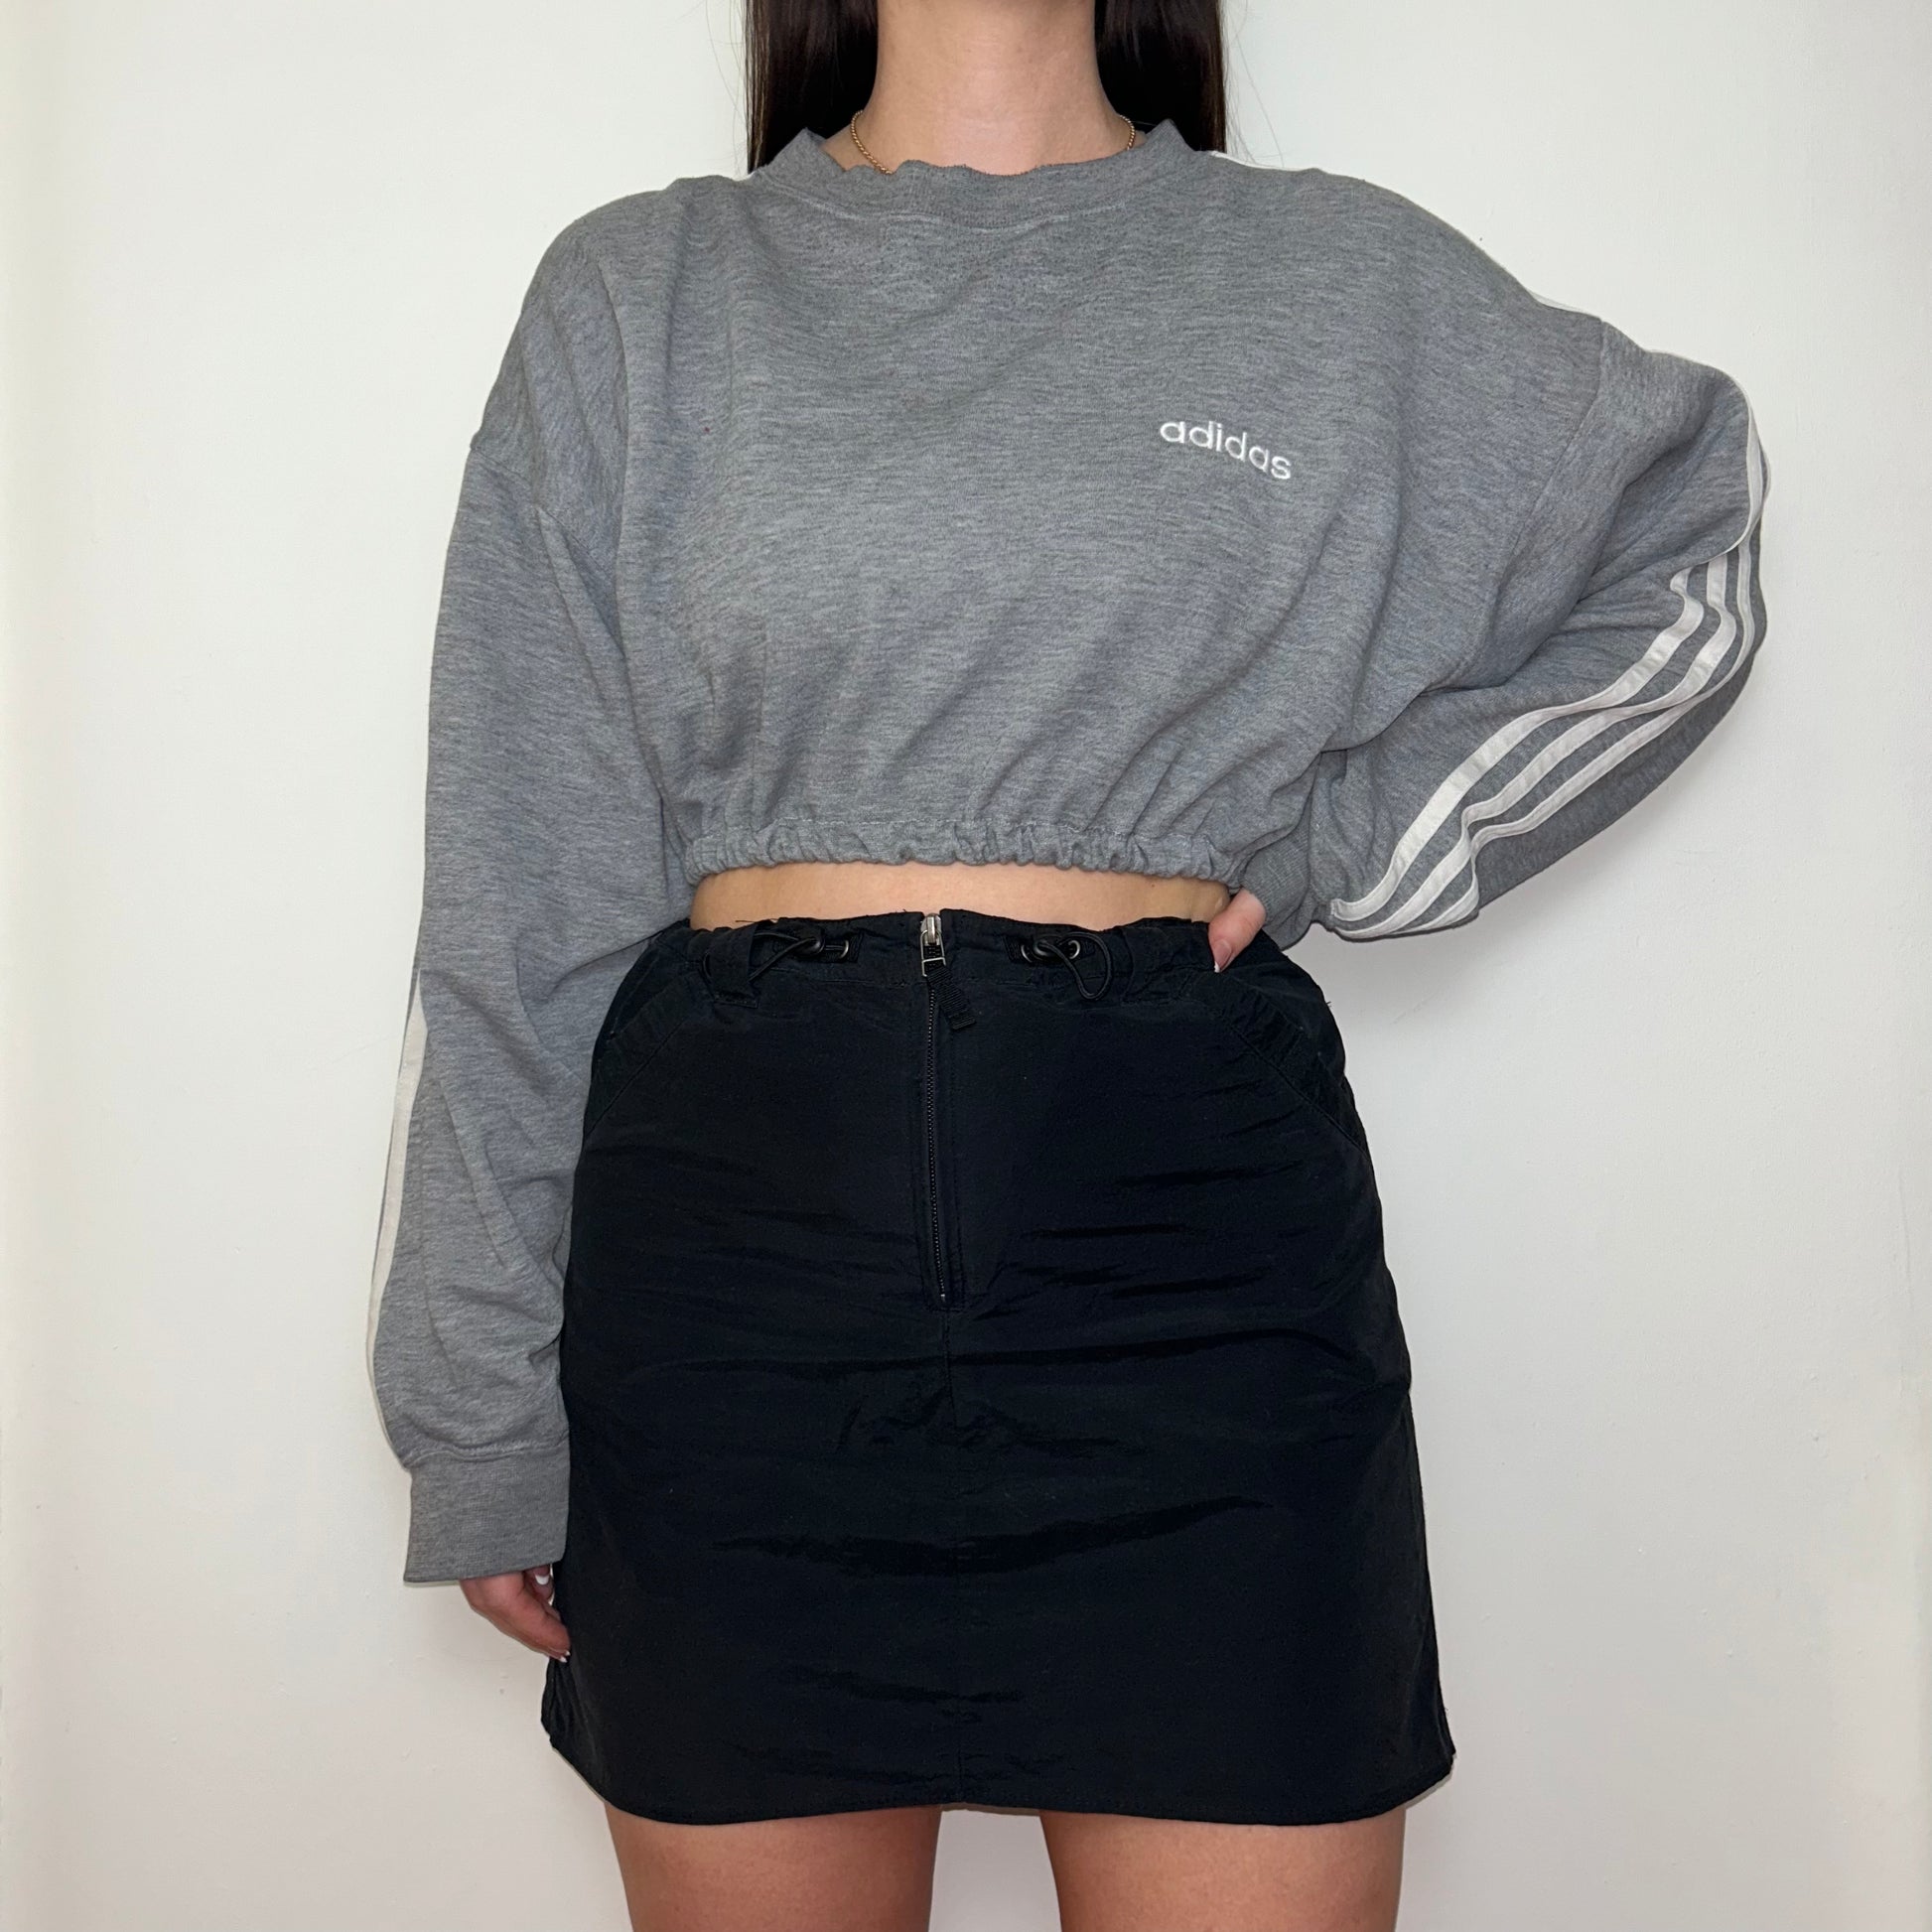 grey cropped sweatshirt with white adidas logo shown on a model wearing a black mini skirt